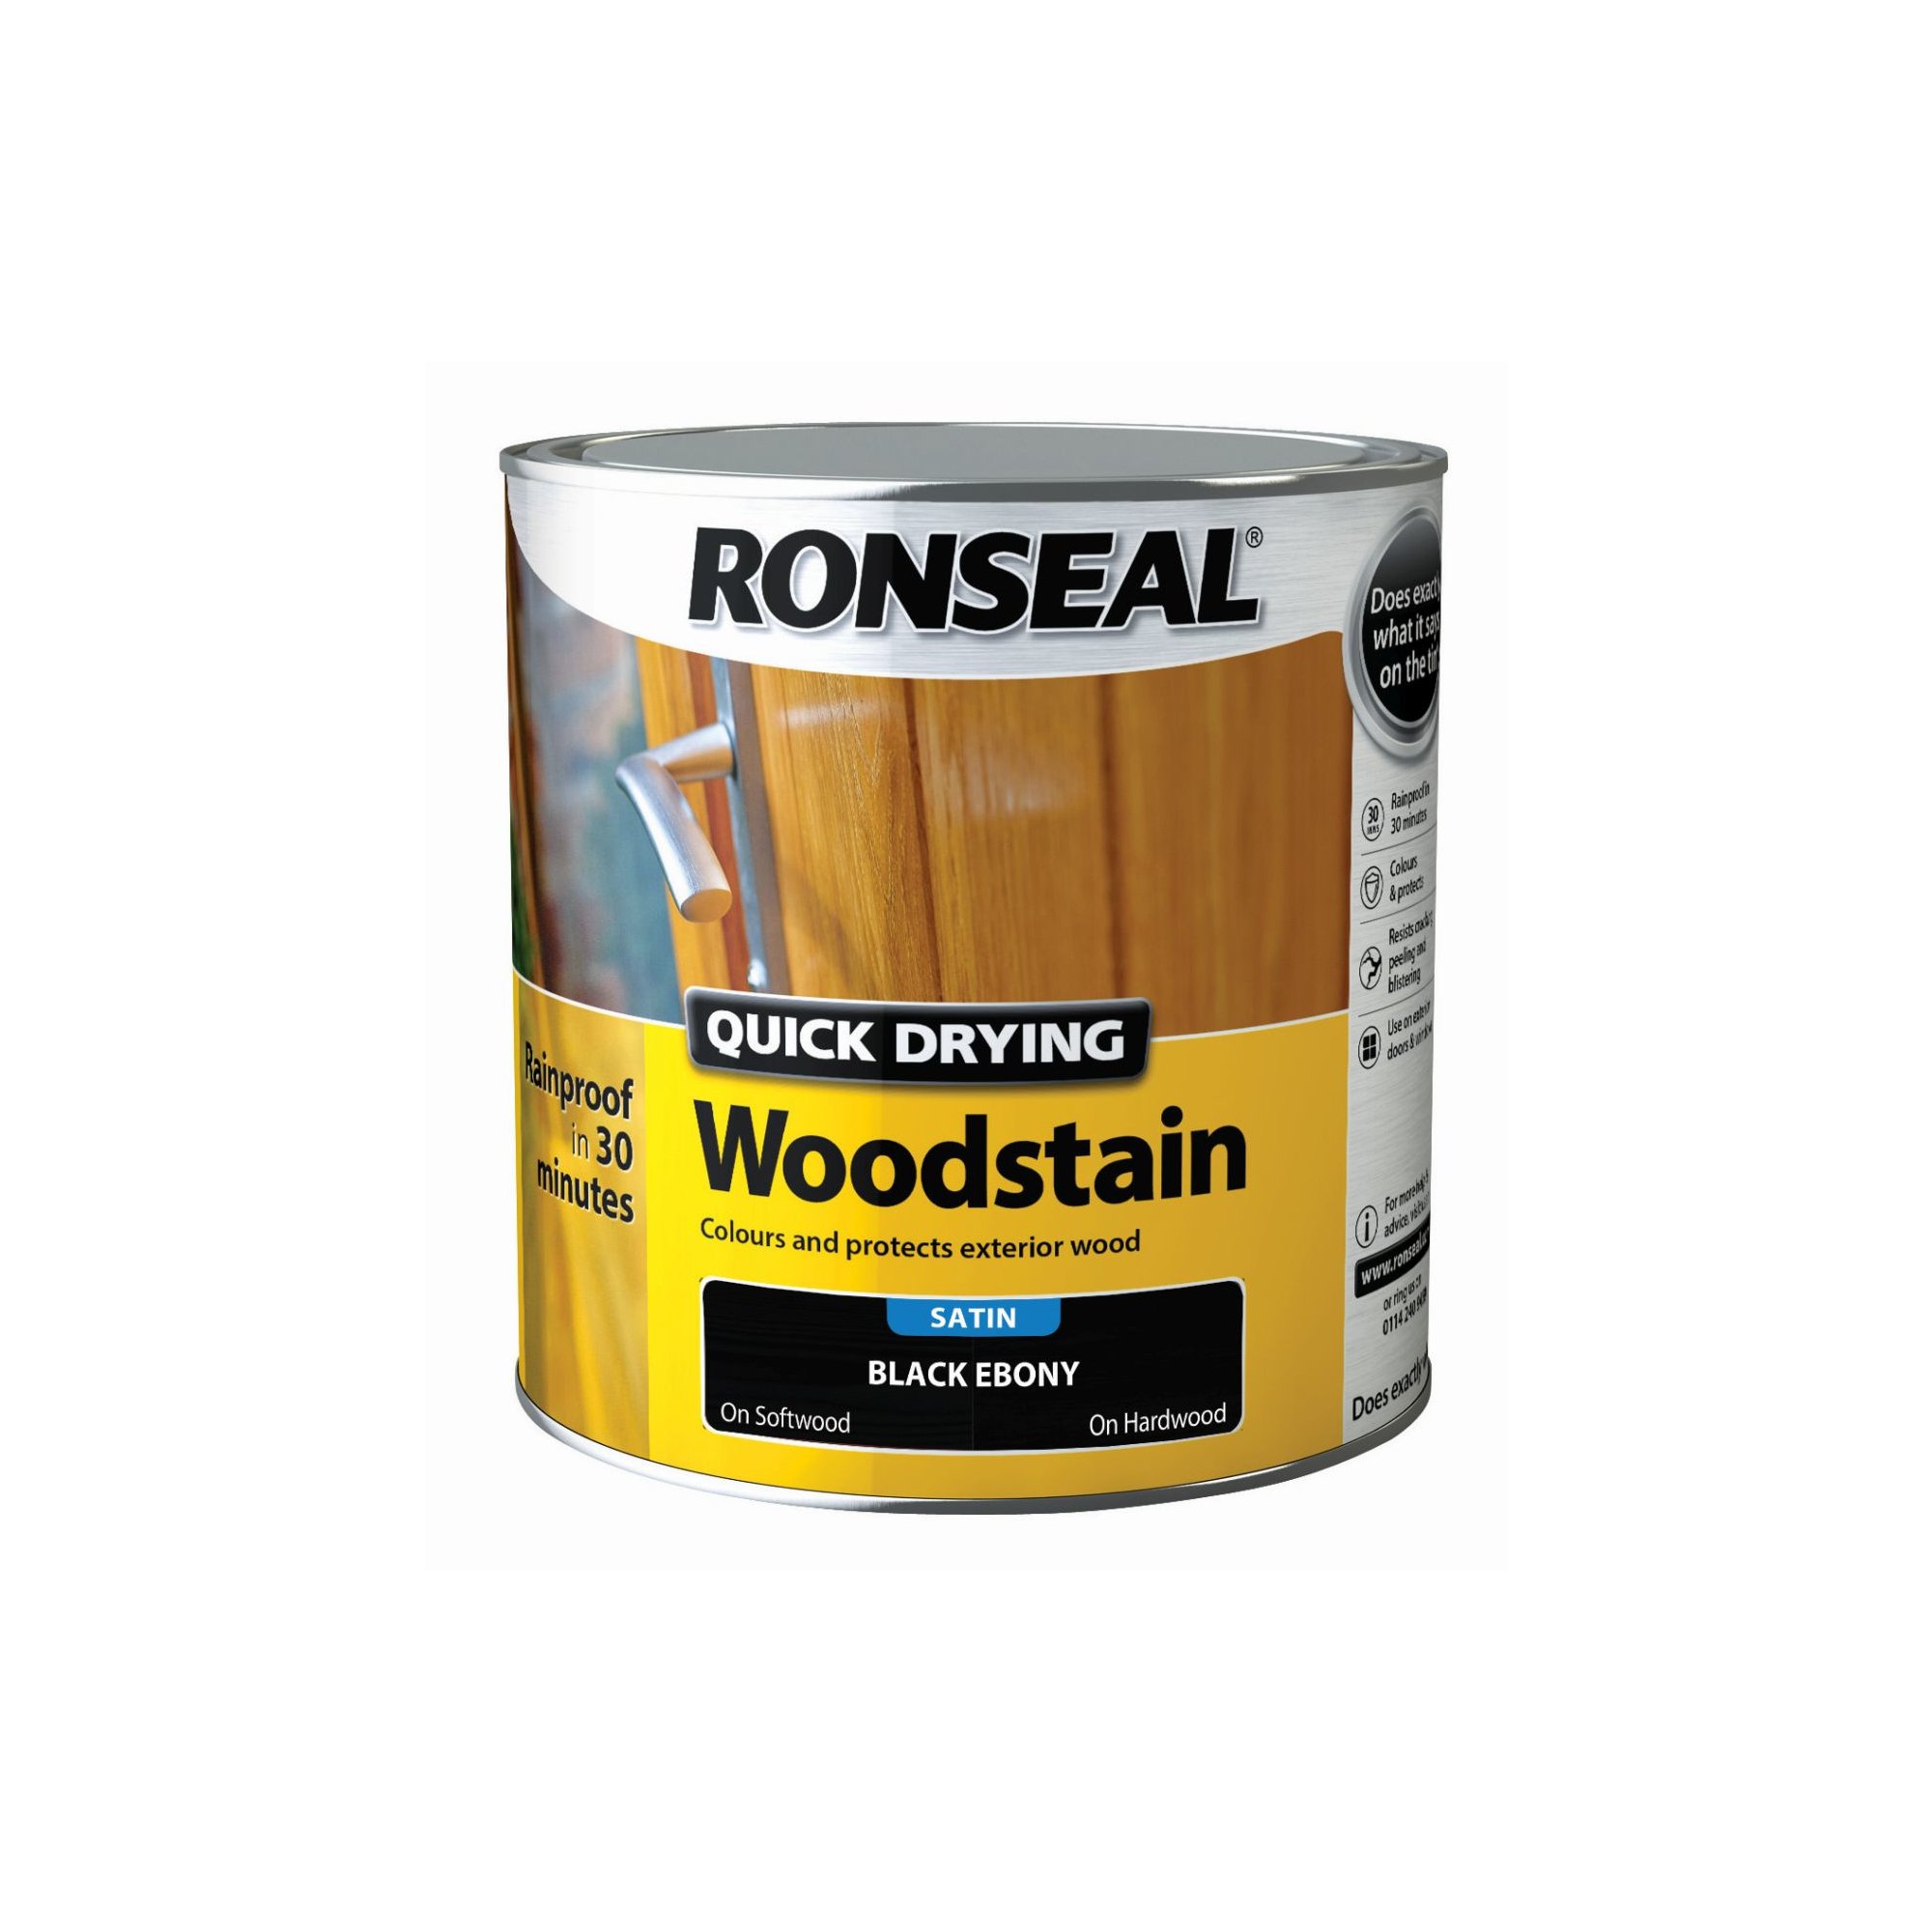 Ronseal Quick Drying Woodstain Black Ebony 2-5L